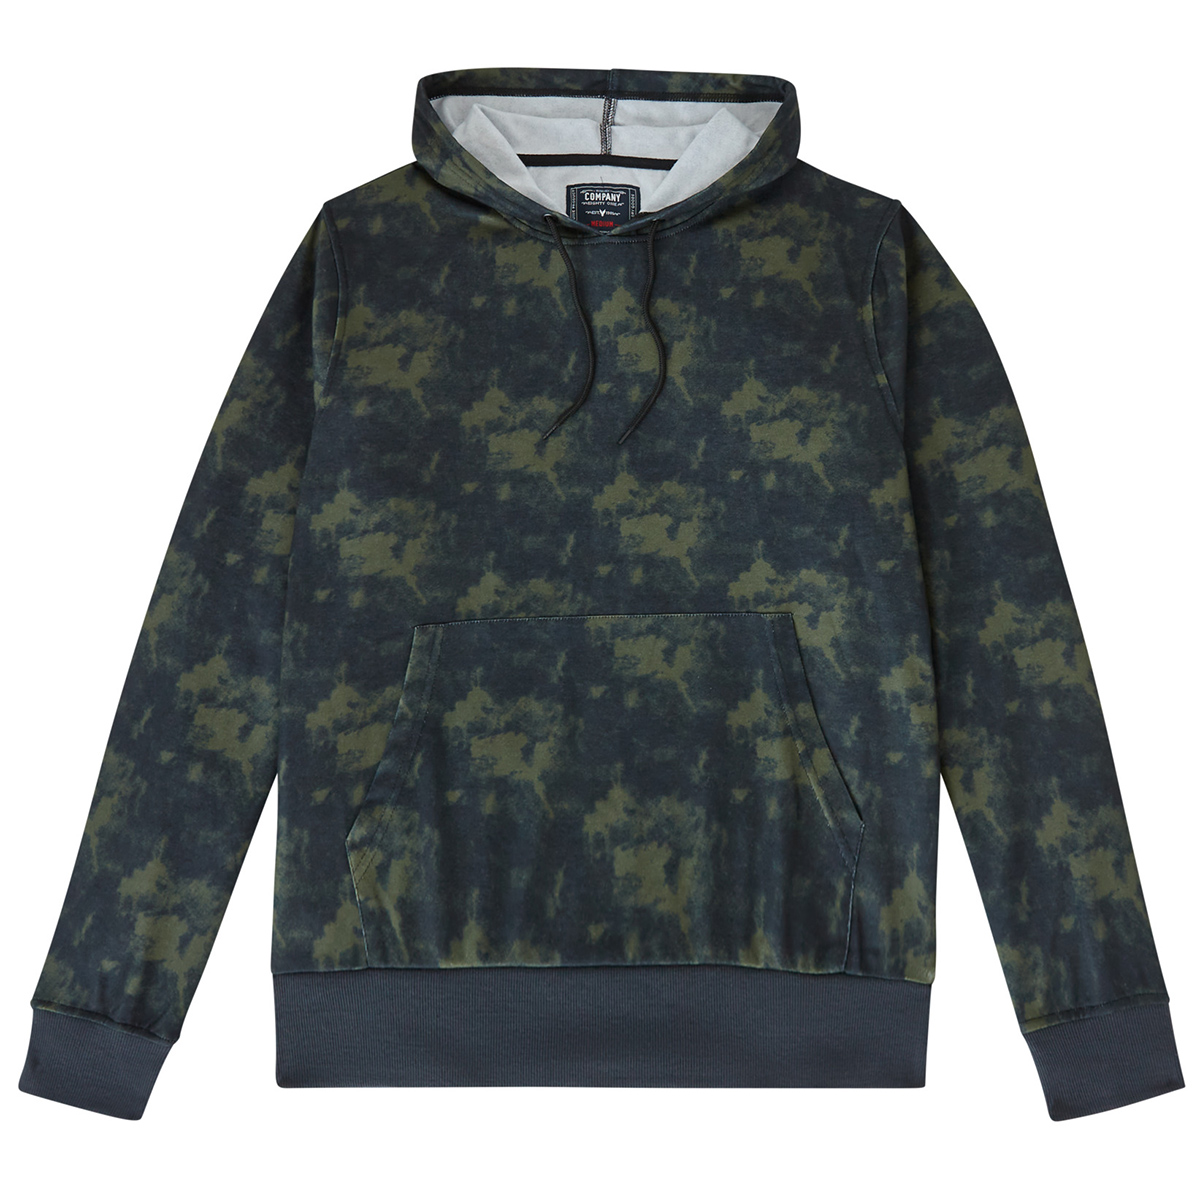 Young Mens Company 81(R) Tie Dye Pullover Hoodie - Dark Olive